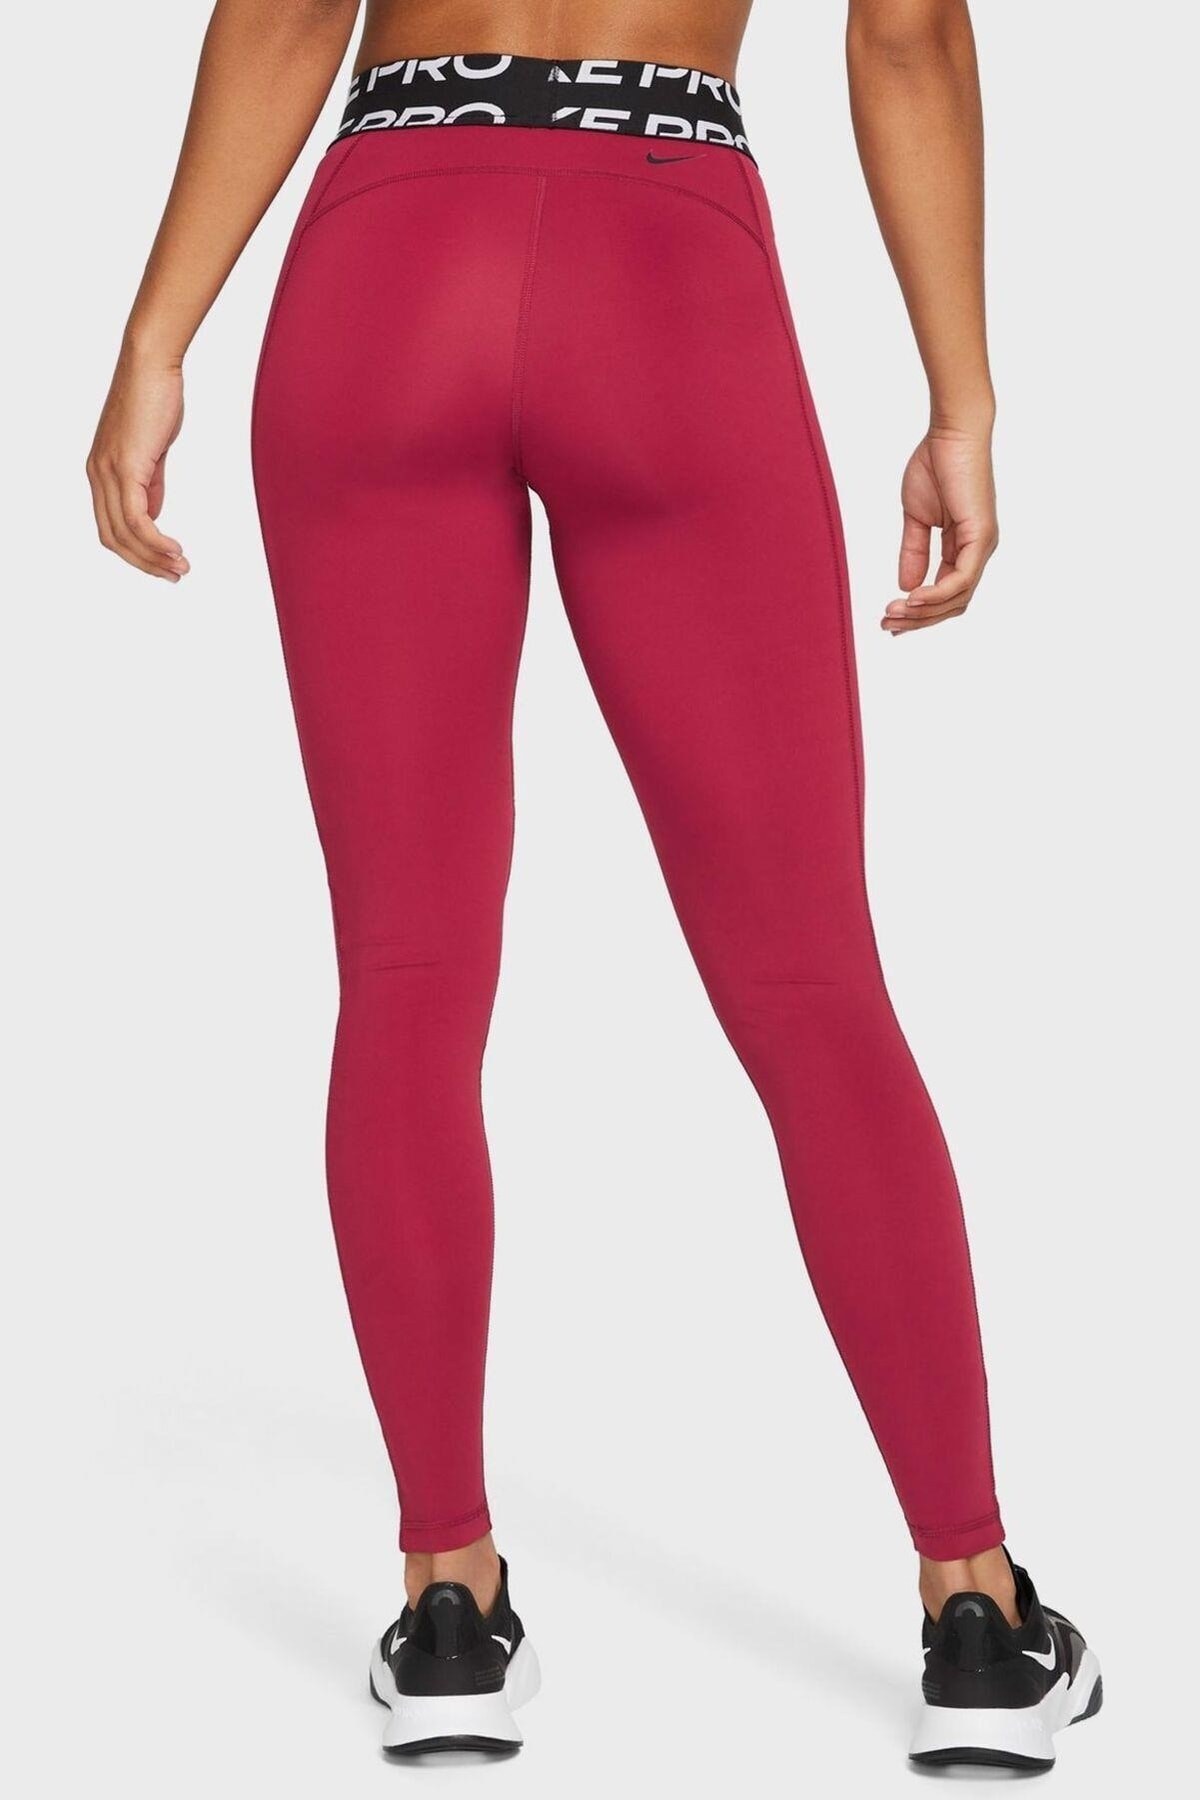 Nike One Dri-FIT Women's Mid-Rise Leggings Pink Red Maroon Plus Size 2X